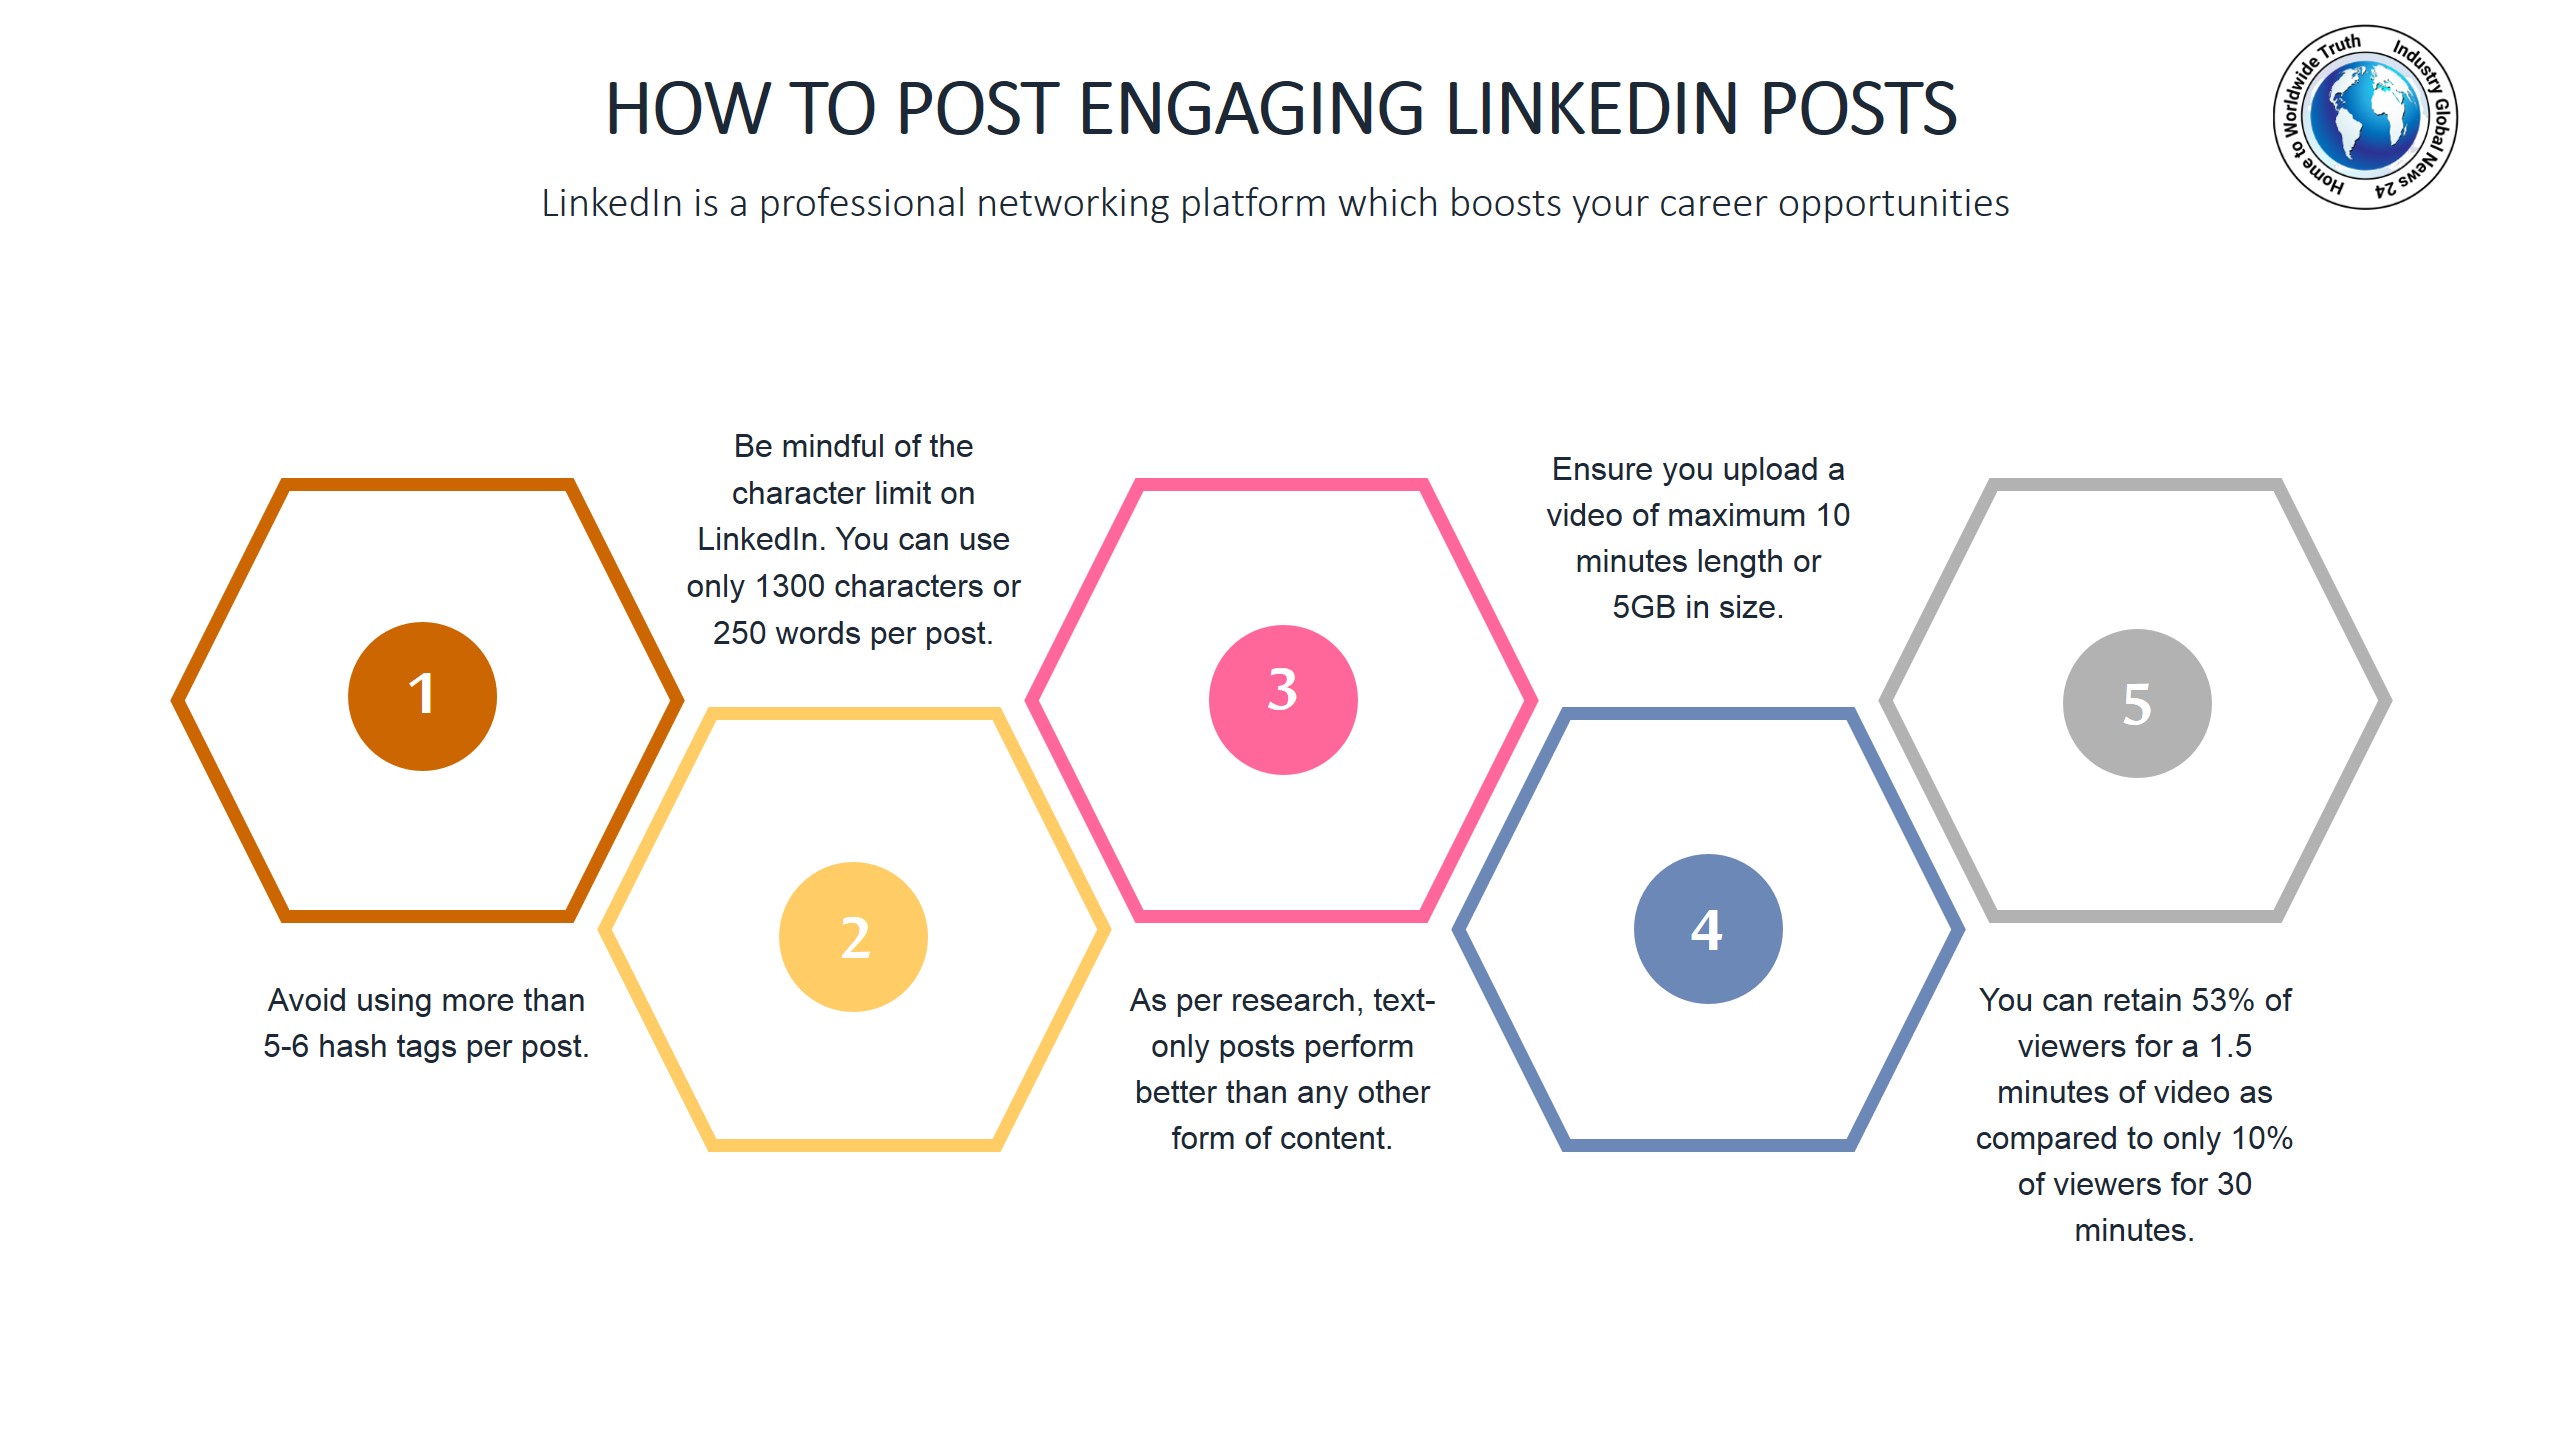 How to post engaging LinkedIn posts